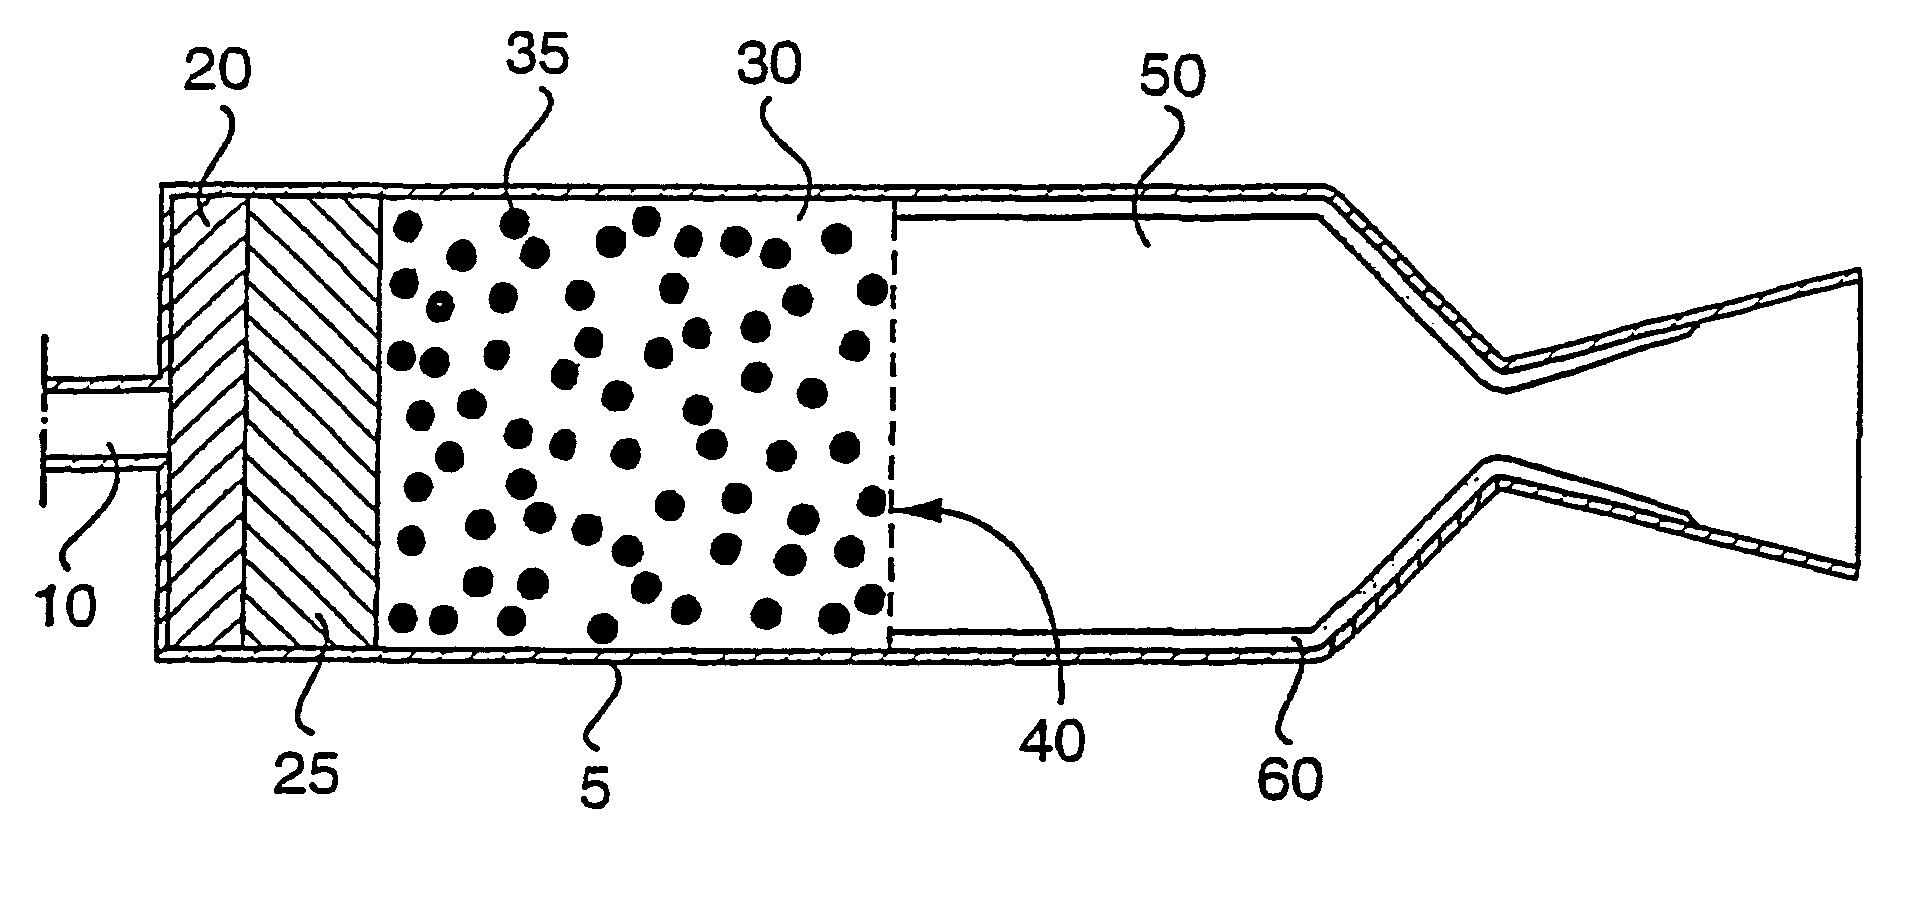 Reactor for decomposition of ammonium dinitramide-based liquid monopropellants and process for the decomposition